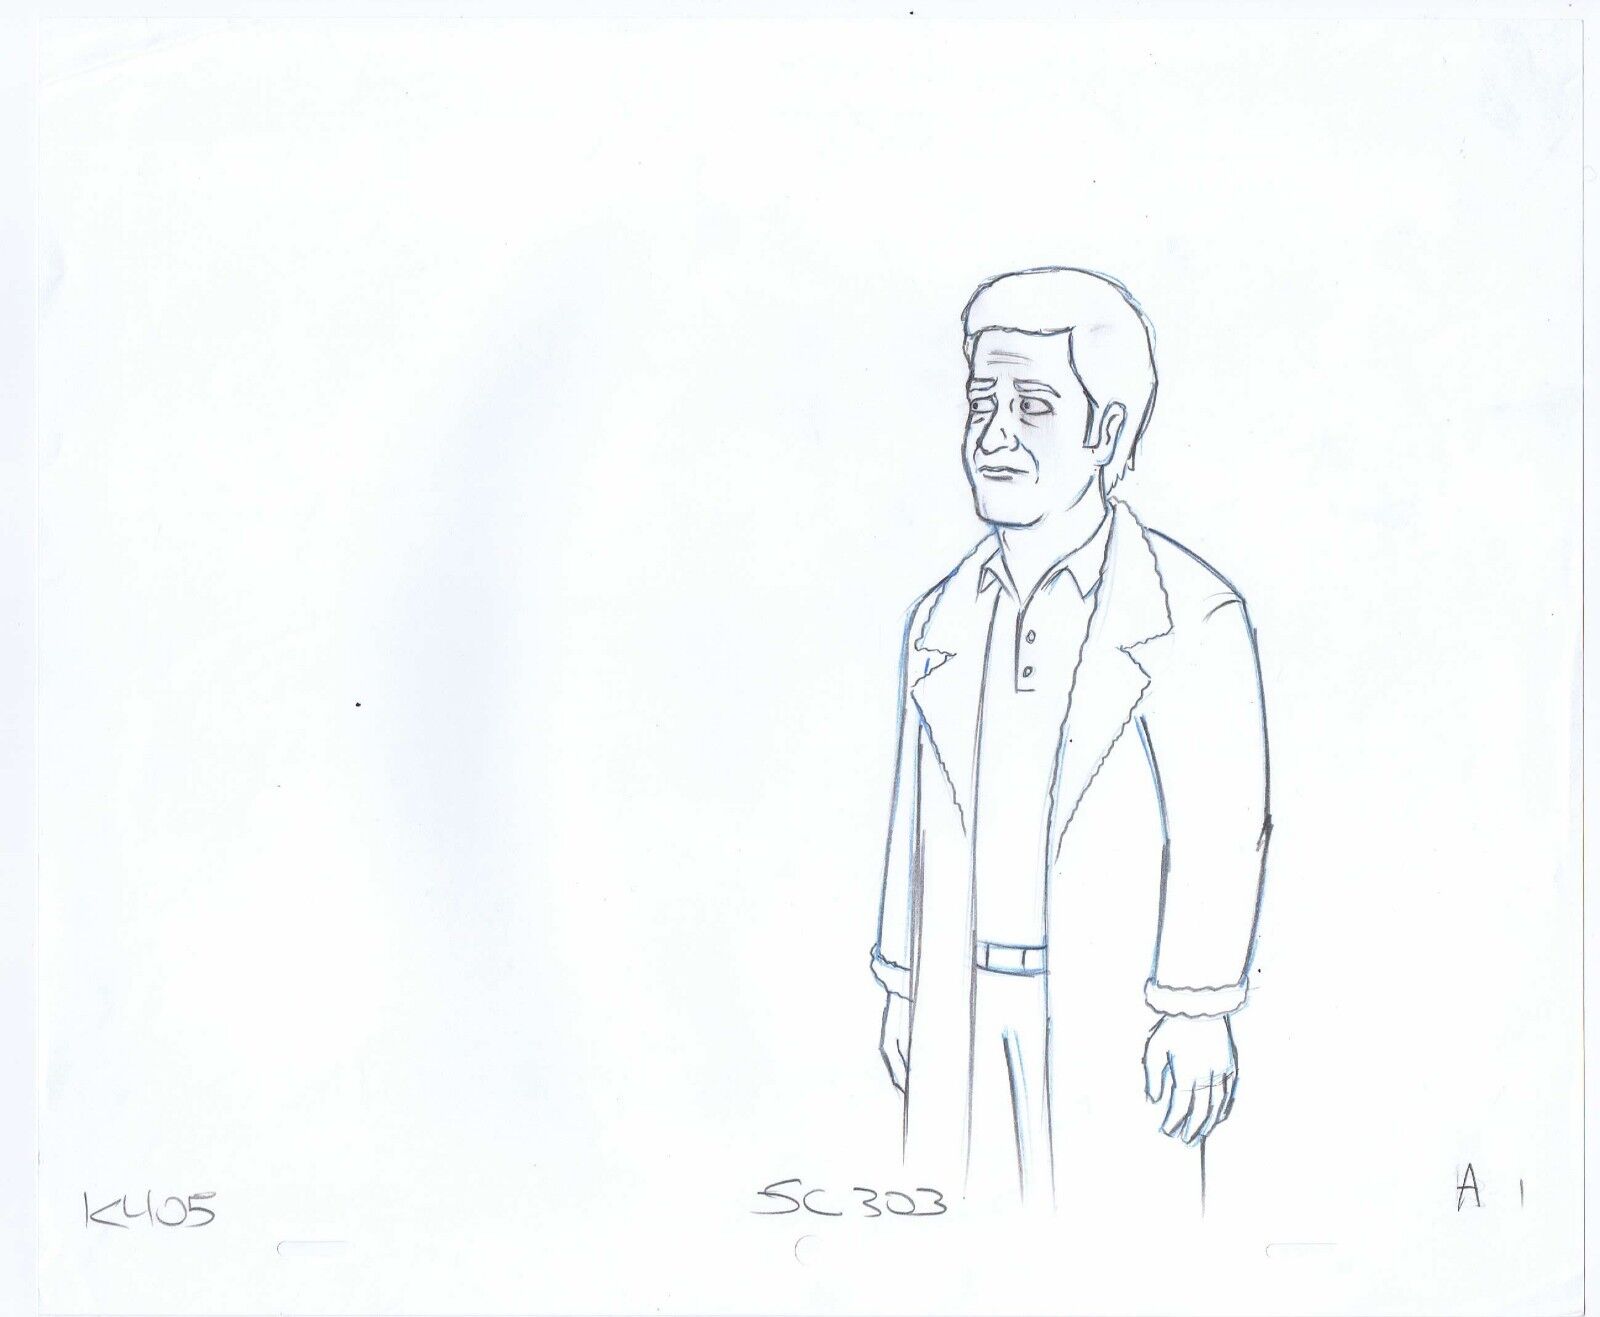 King of the Hill Don Meredith Original Art Animation Pencils K405 SC 303 A-1